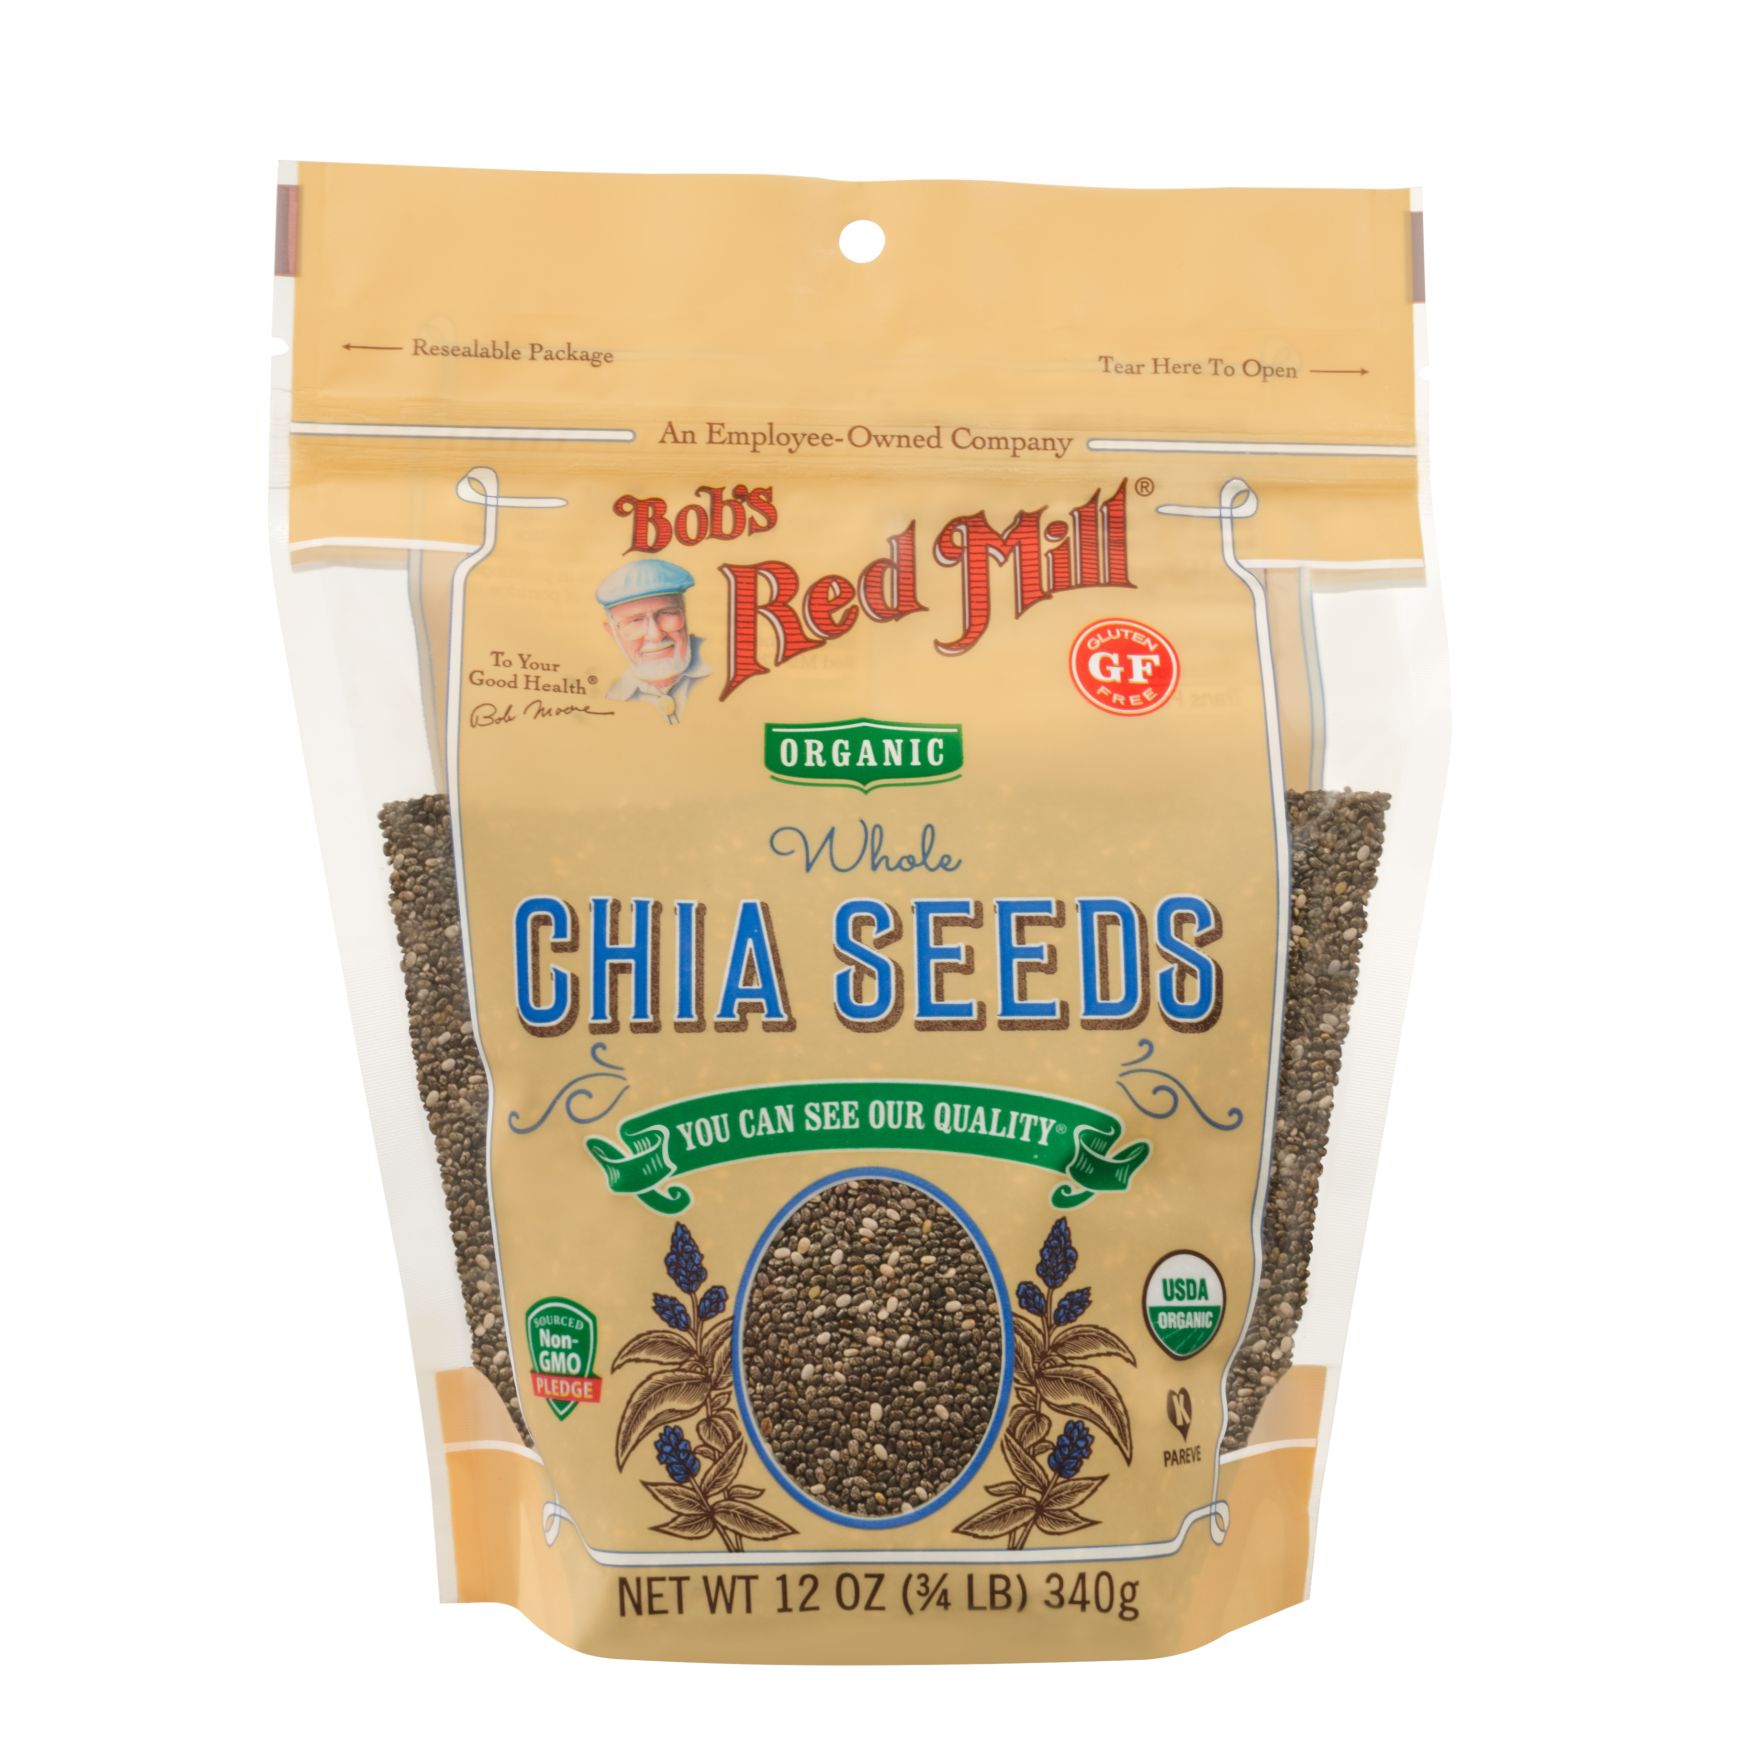 Chia Seeds | Bob's Red Mill